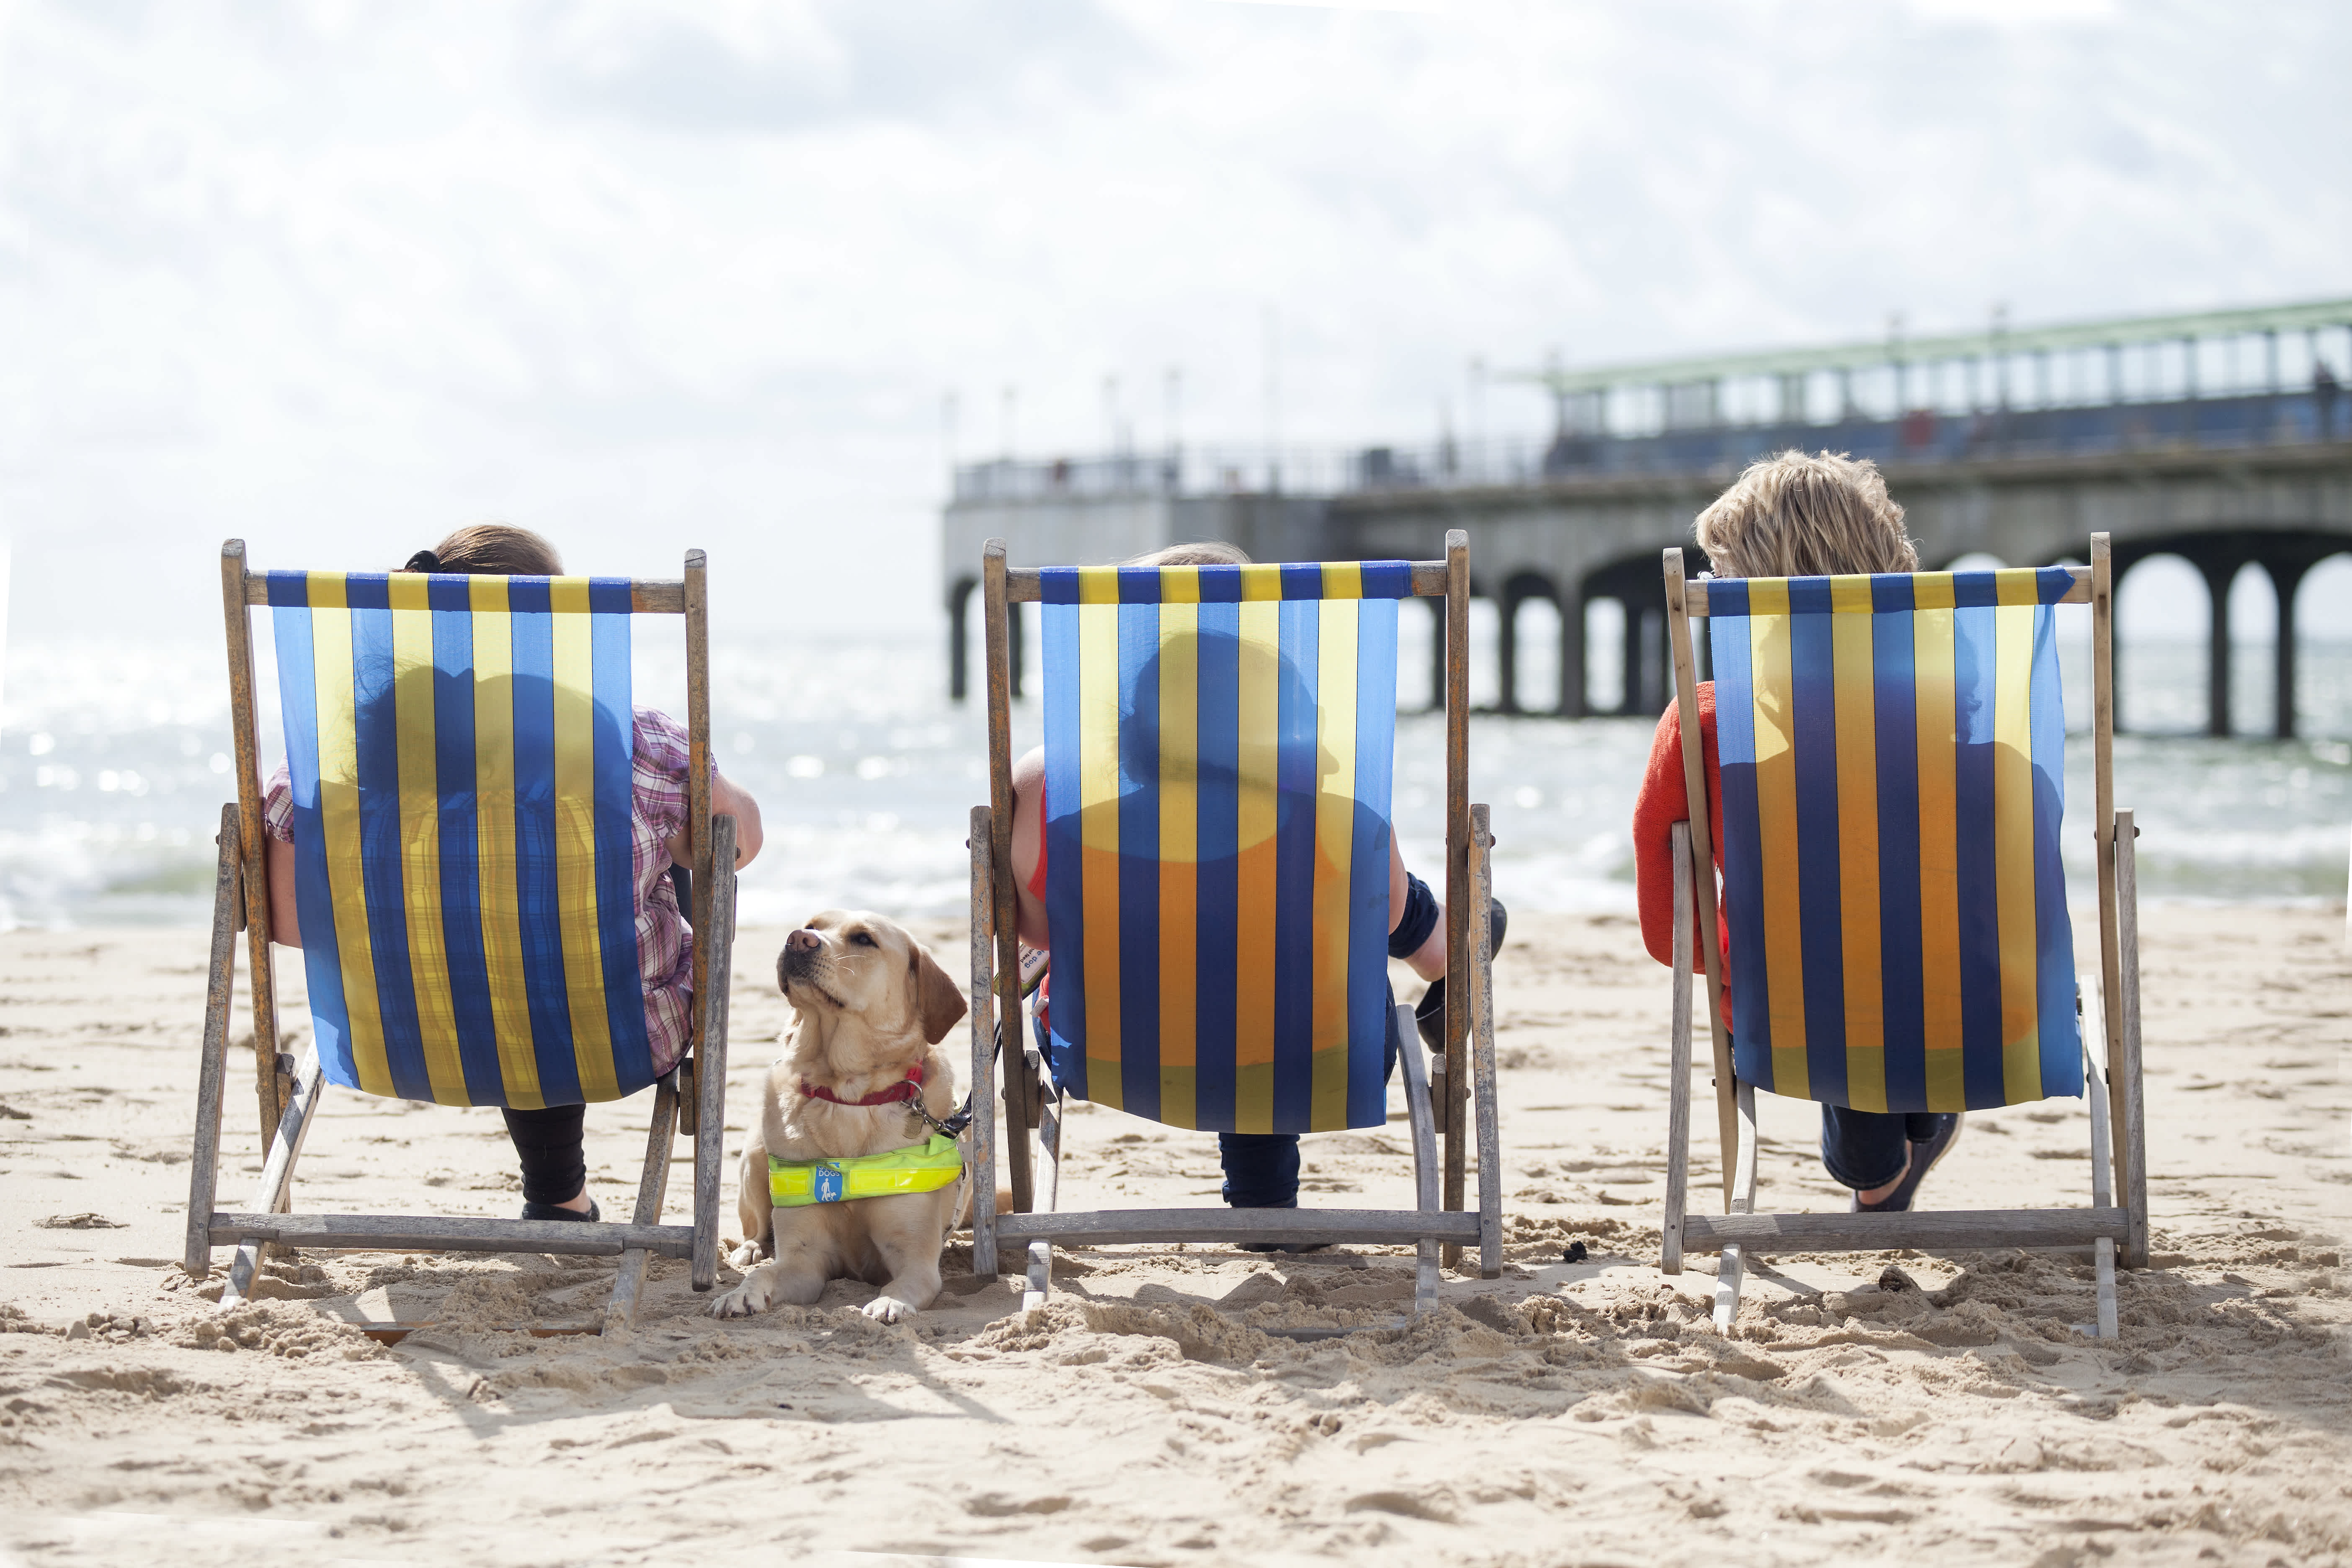 Guide dog sits in between three deckchairs lined up on a sandy beach. The deckchairs are facing away from the camera towards the sea and a pier while the guide dog is lying down and facing towards the camera, looking at the person in the deckchair on the left. 